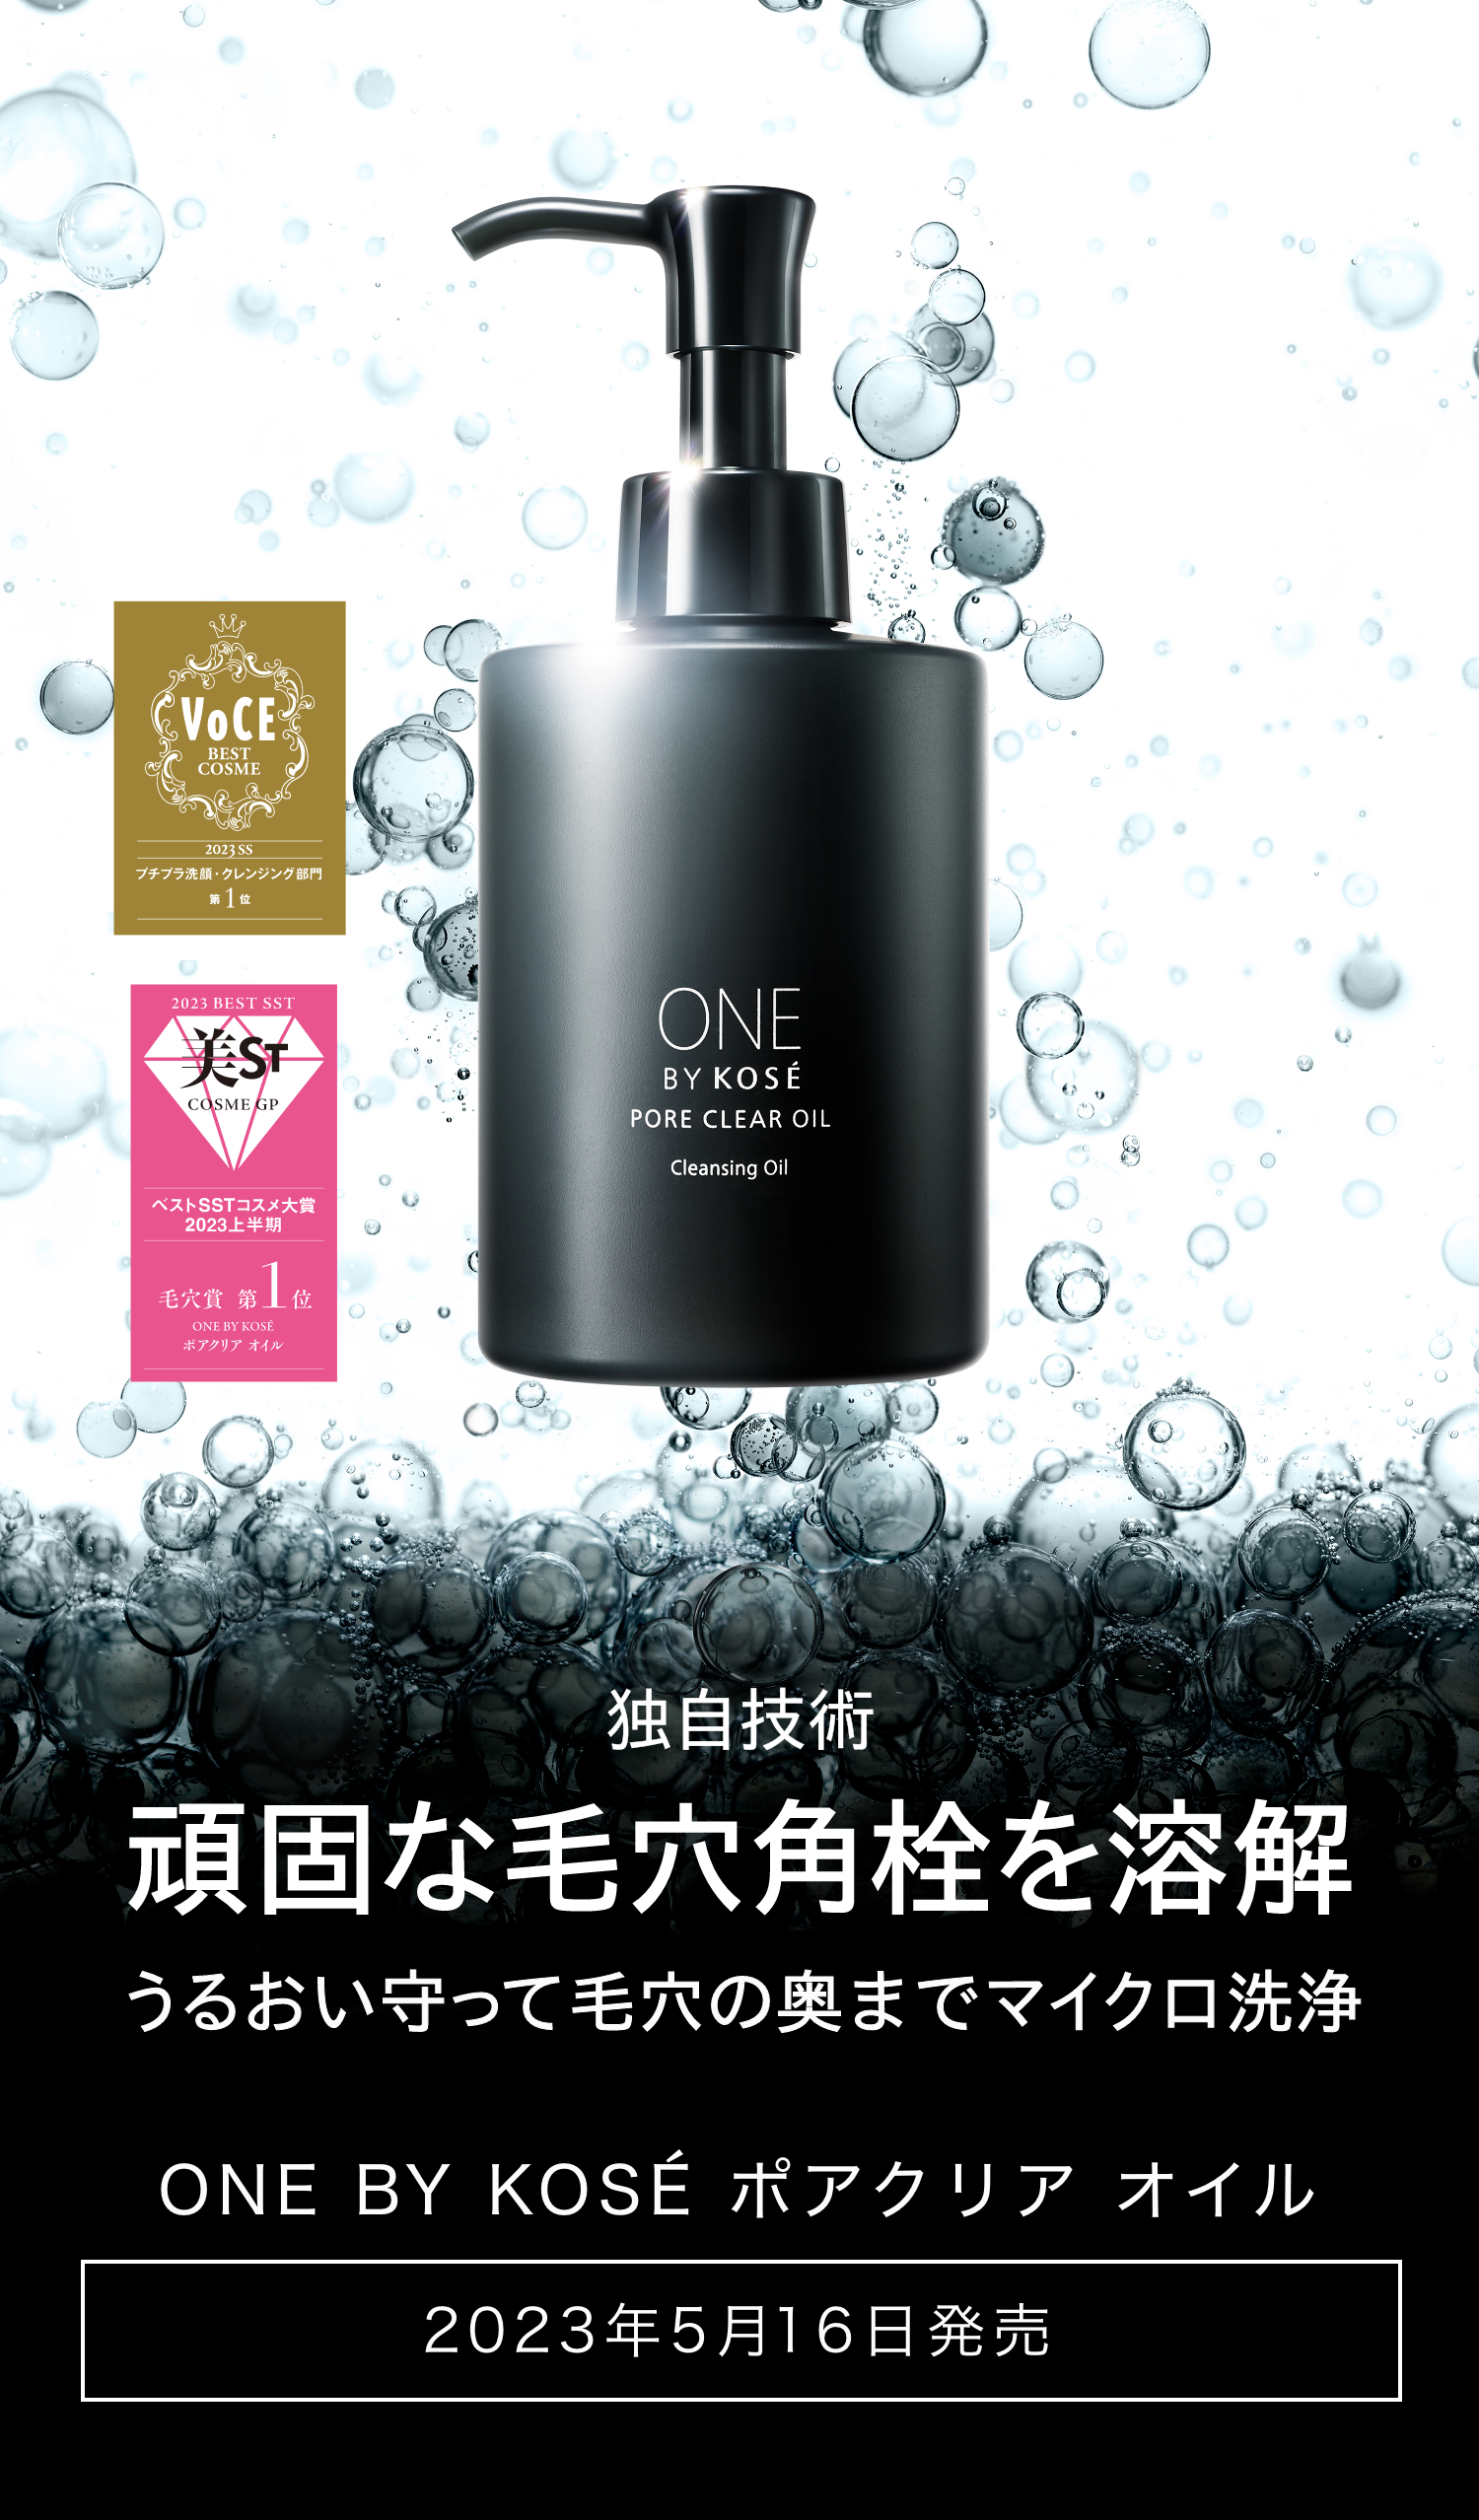 DETAIL｜PORE CLEAR OIL｜ONE BY KOSÉ｜KOSE